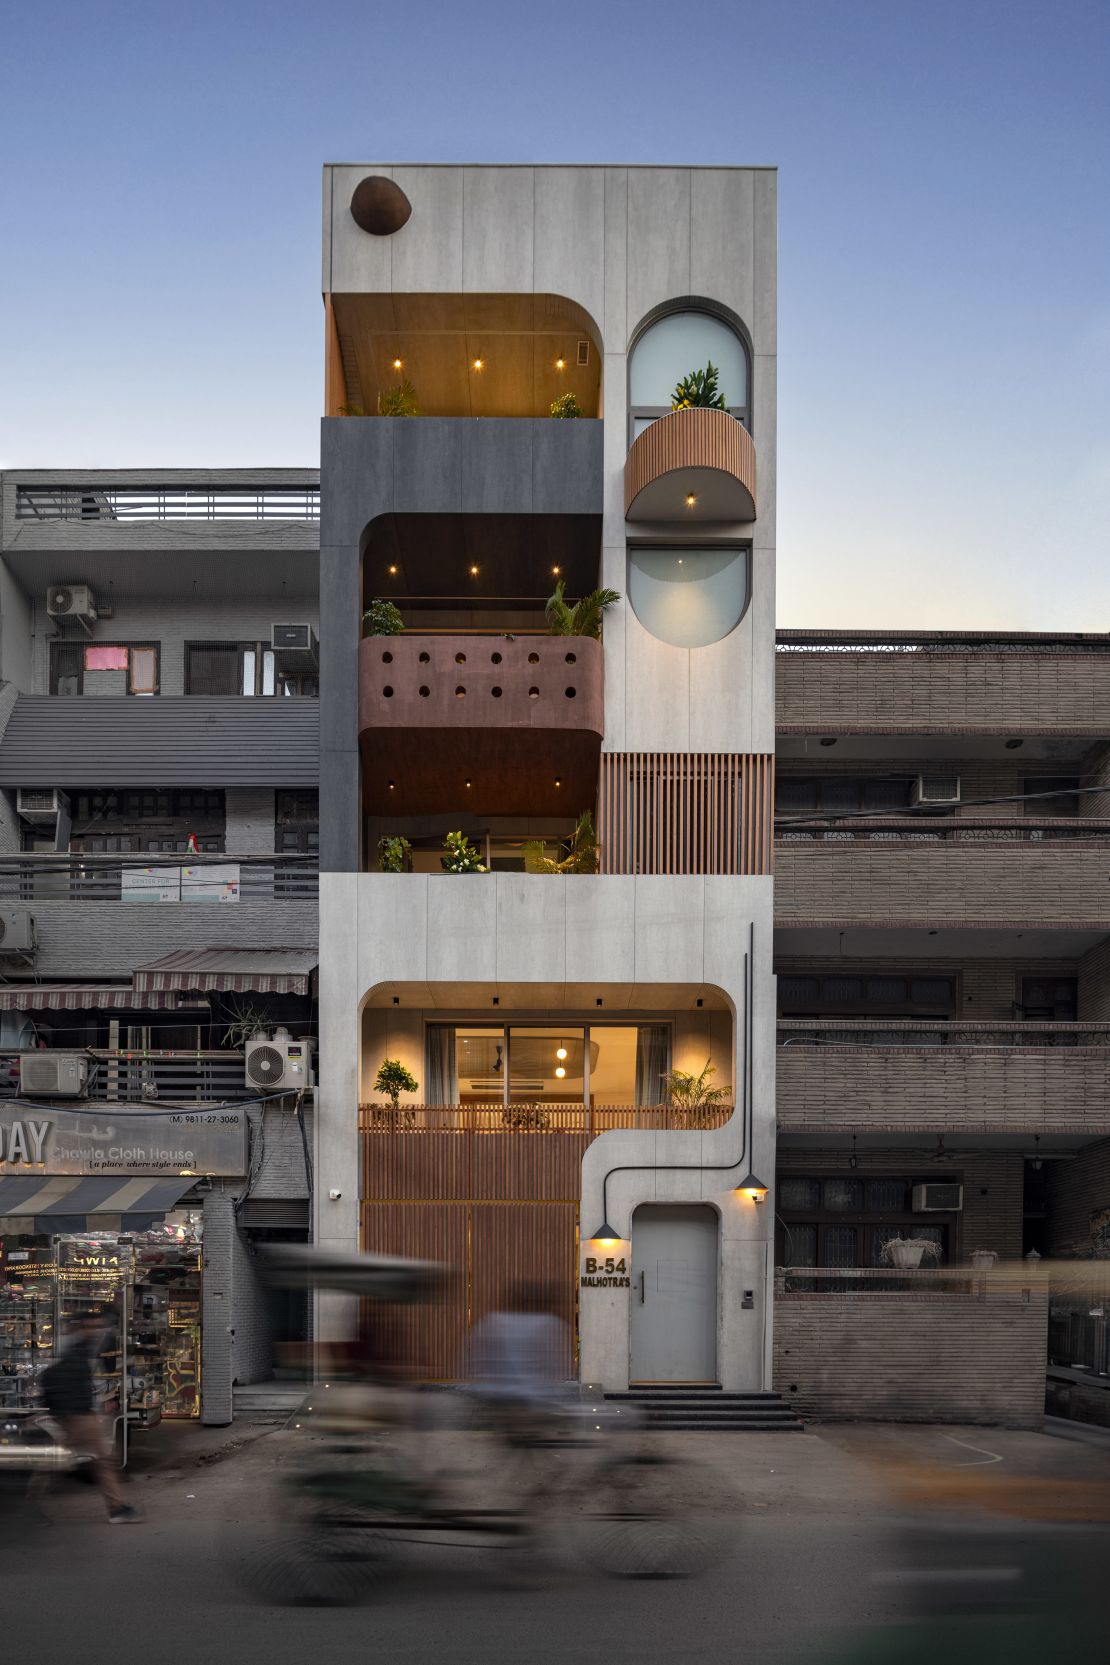 The aptly named Slender House, by Indian firm Spaces Architects@KA, was built on a plot in Delhi measuring just 6 meters (19.7 feet) wide.